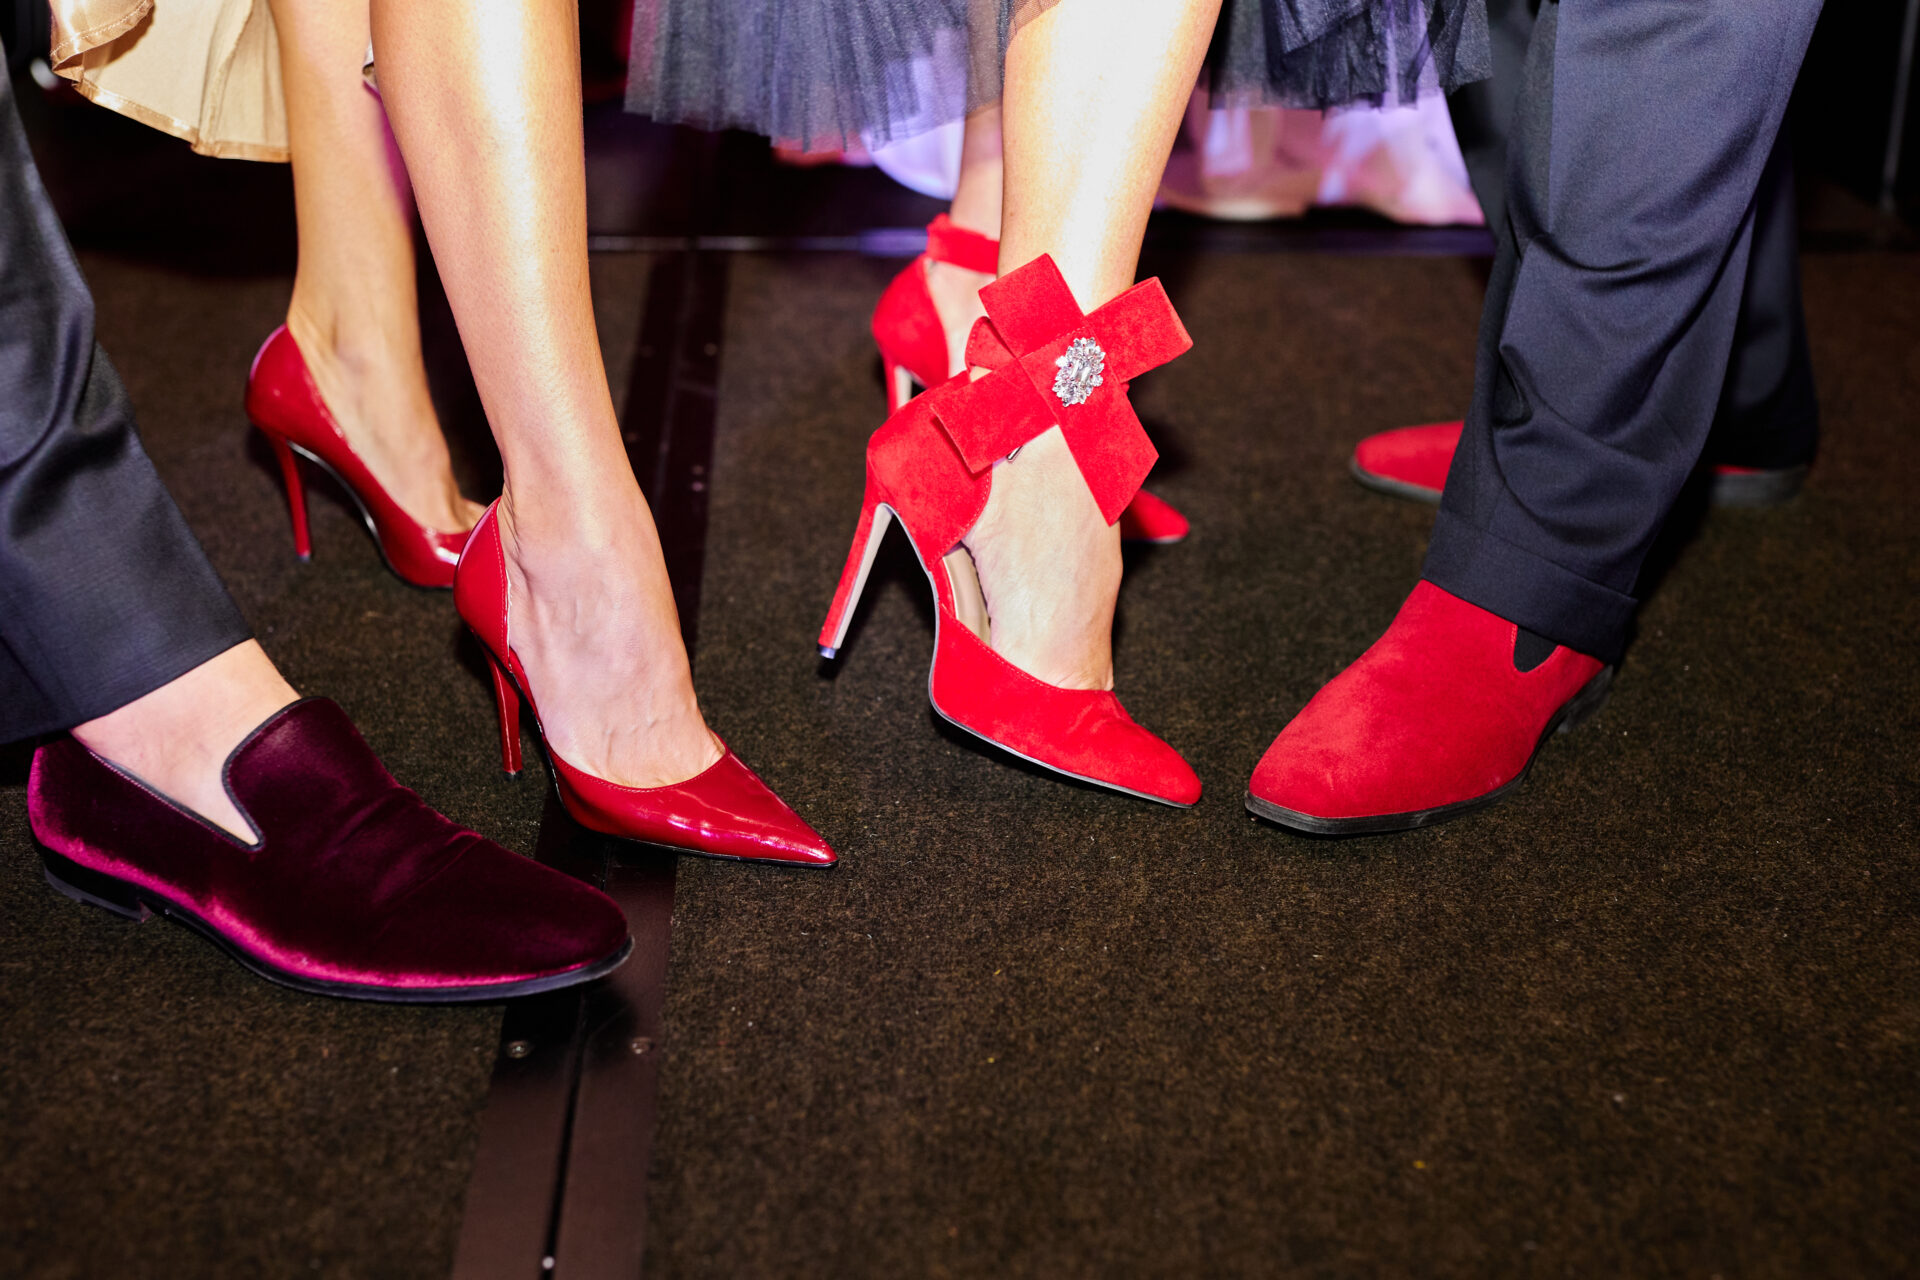 Photo of committee's red shoes